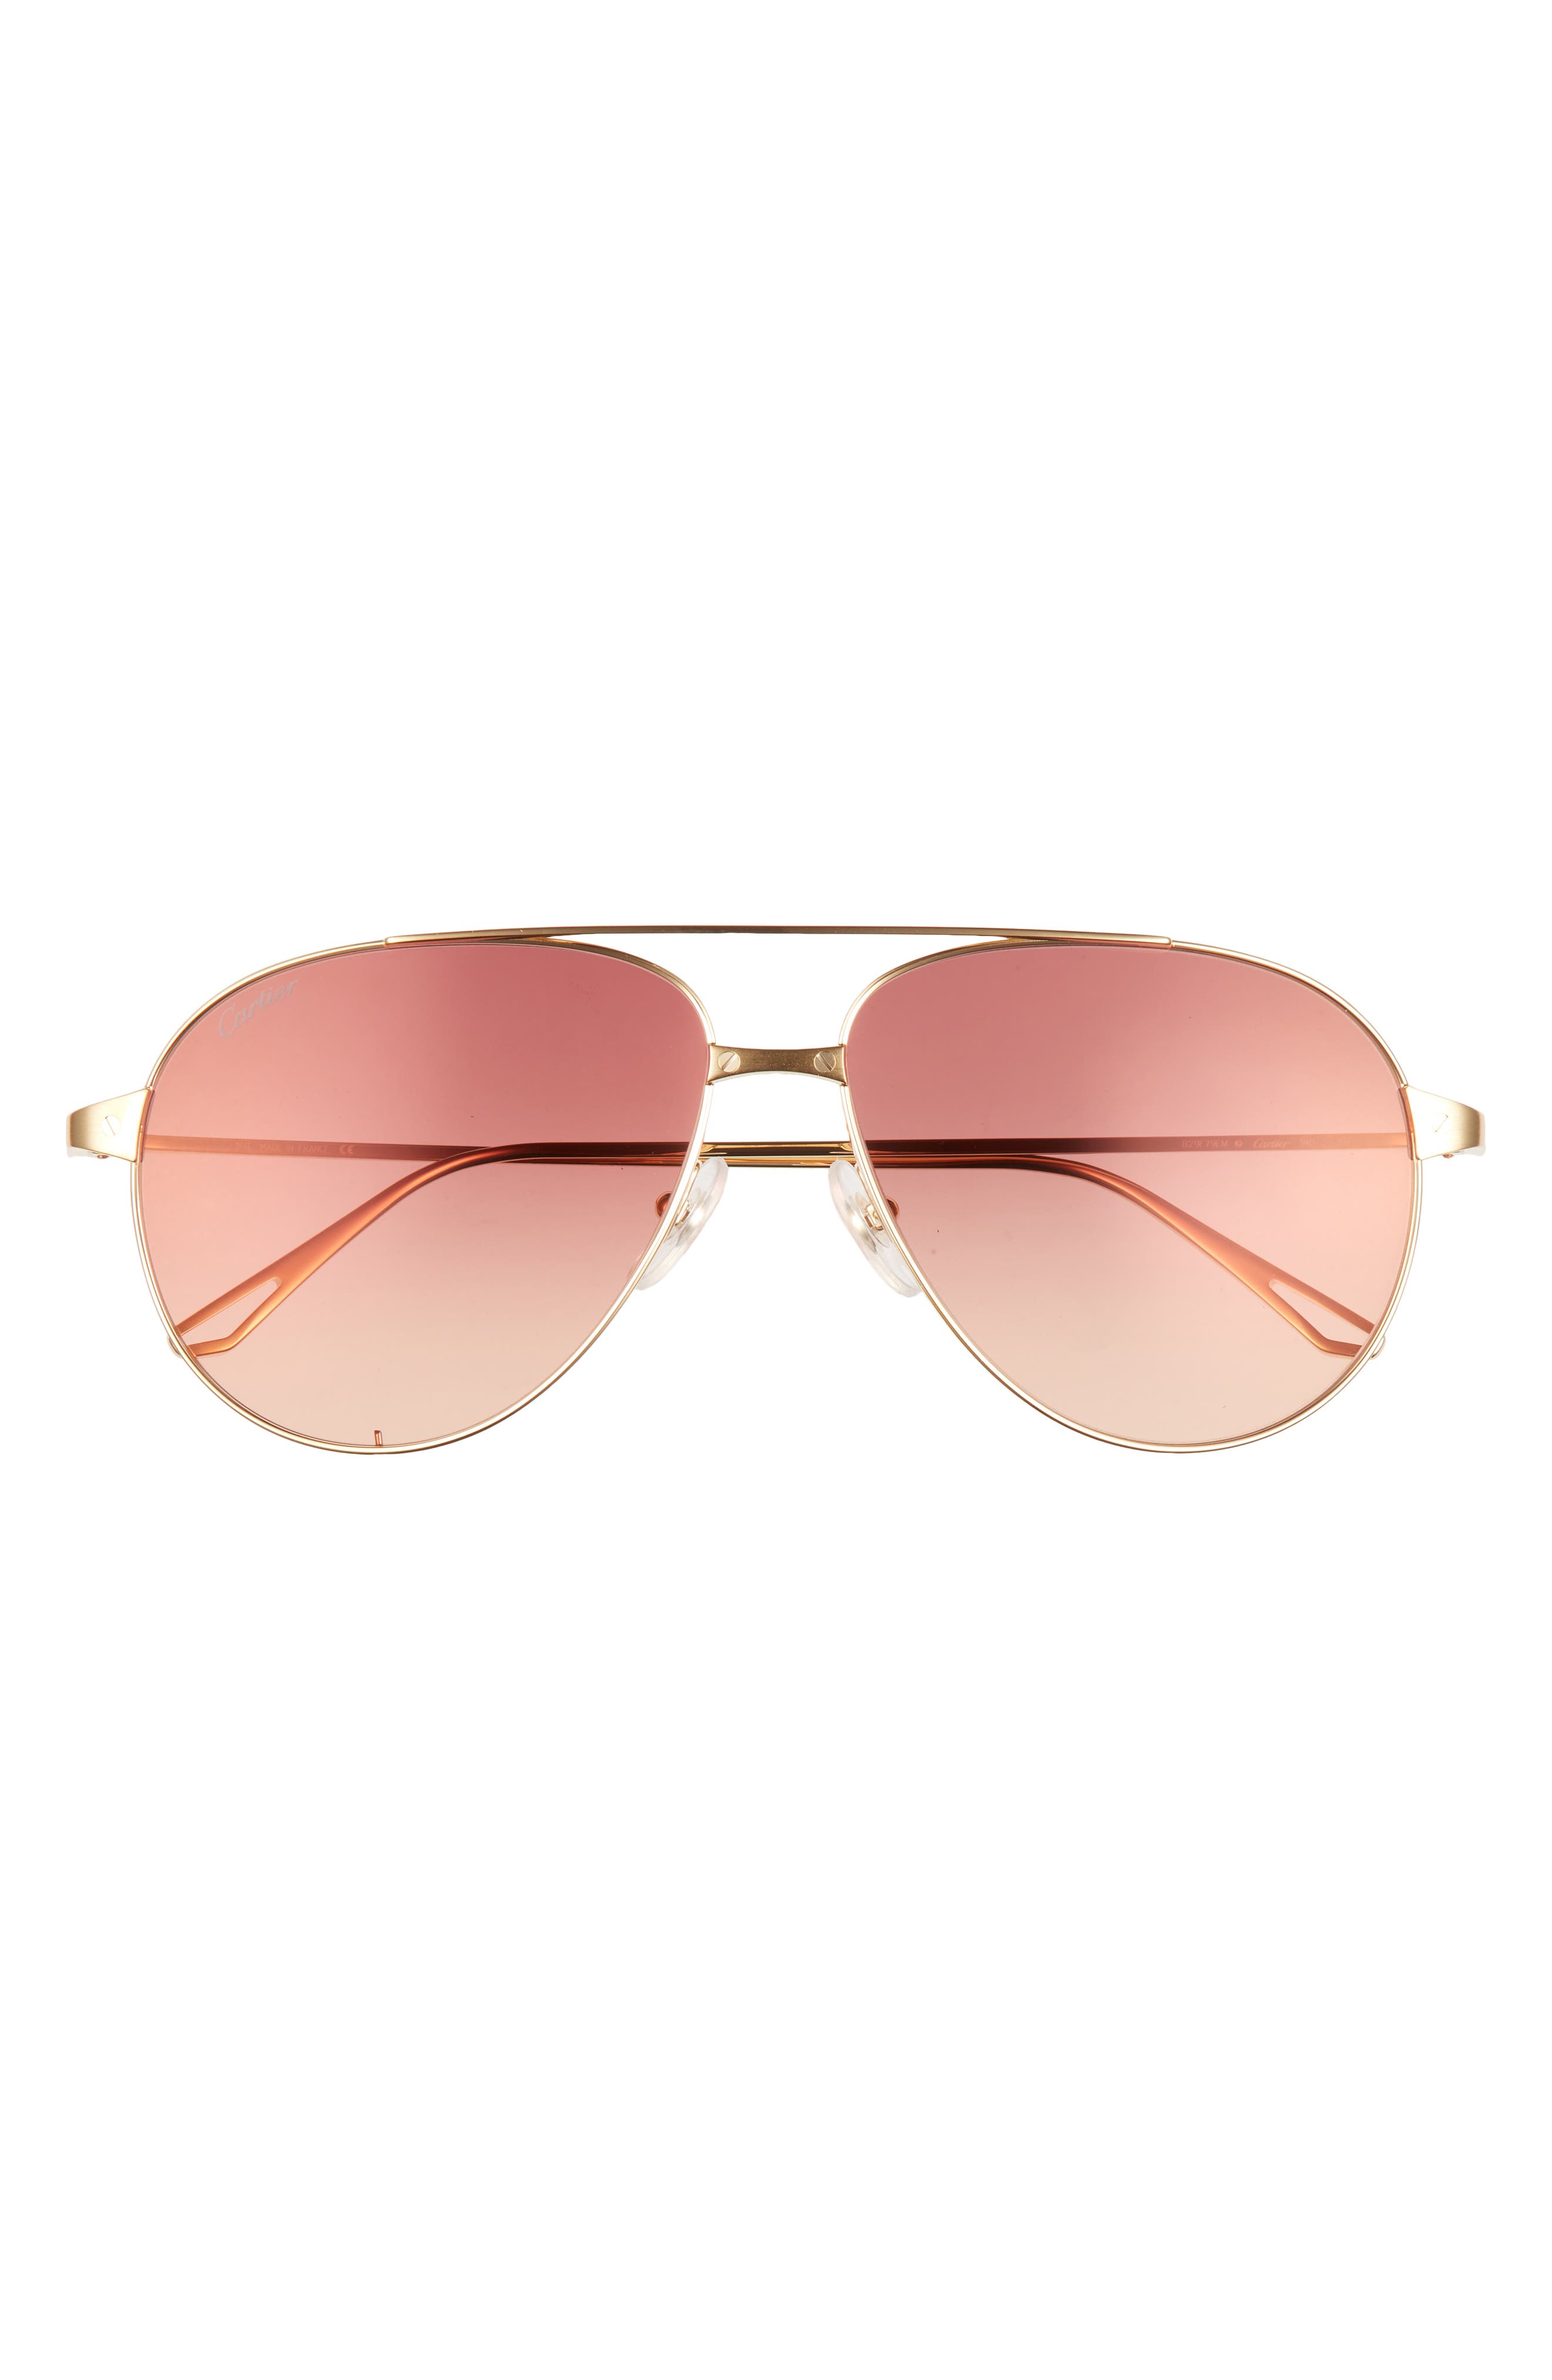 Cartier 59mm Aviator Sunglasses in Gold/Pink at Nordstrom